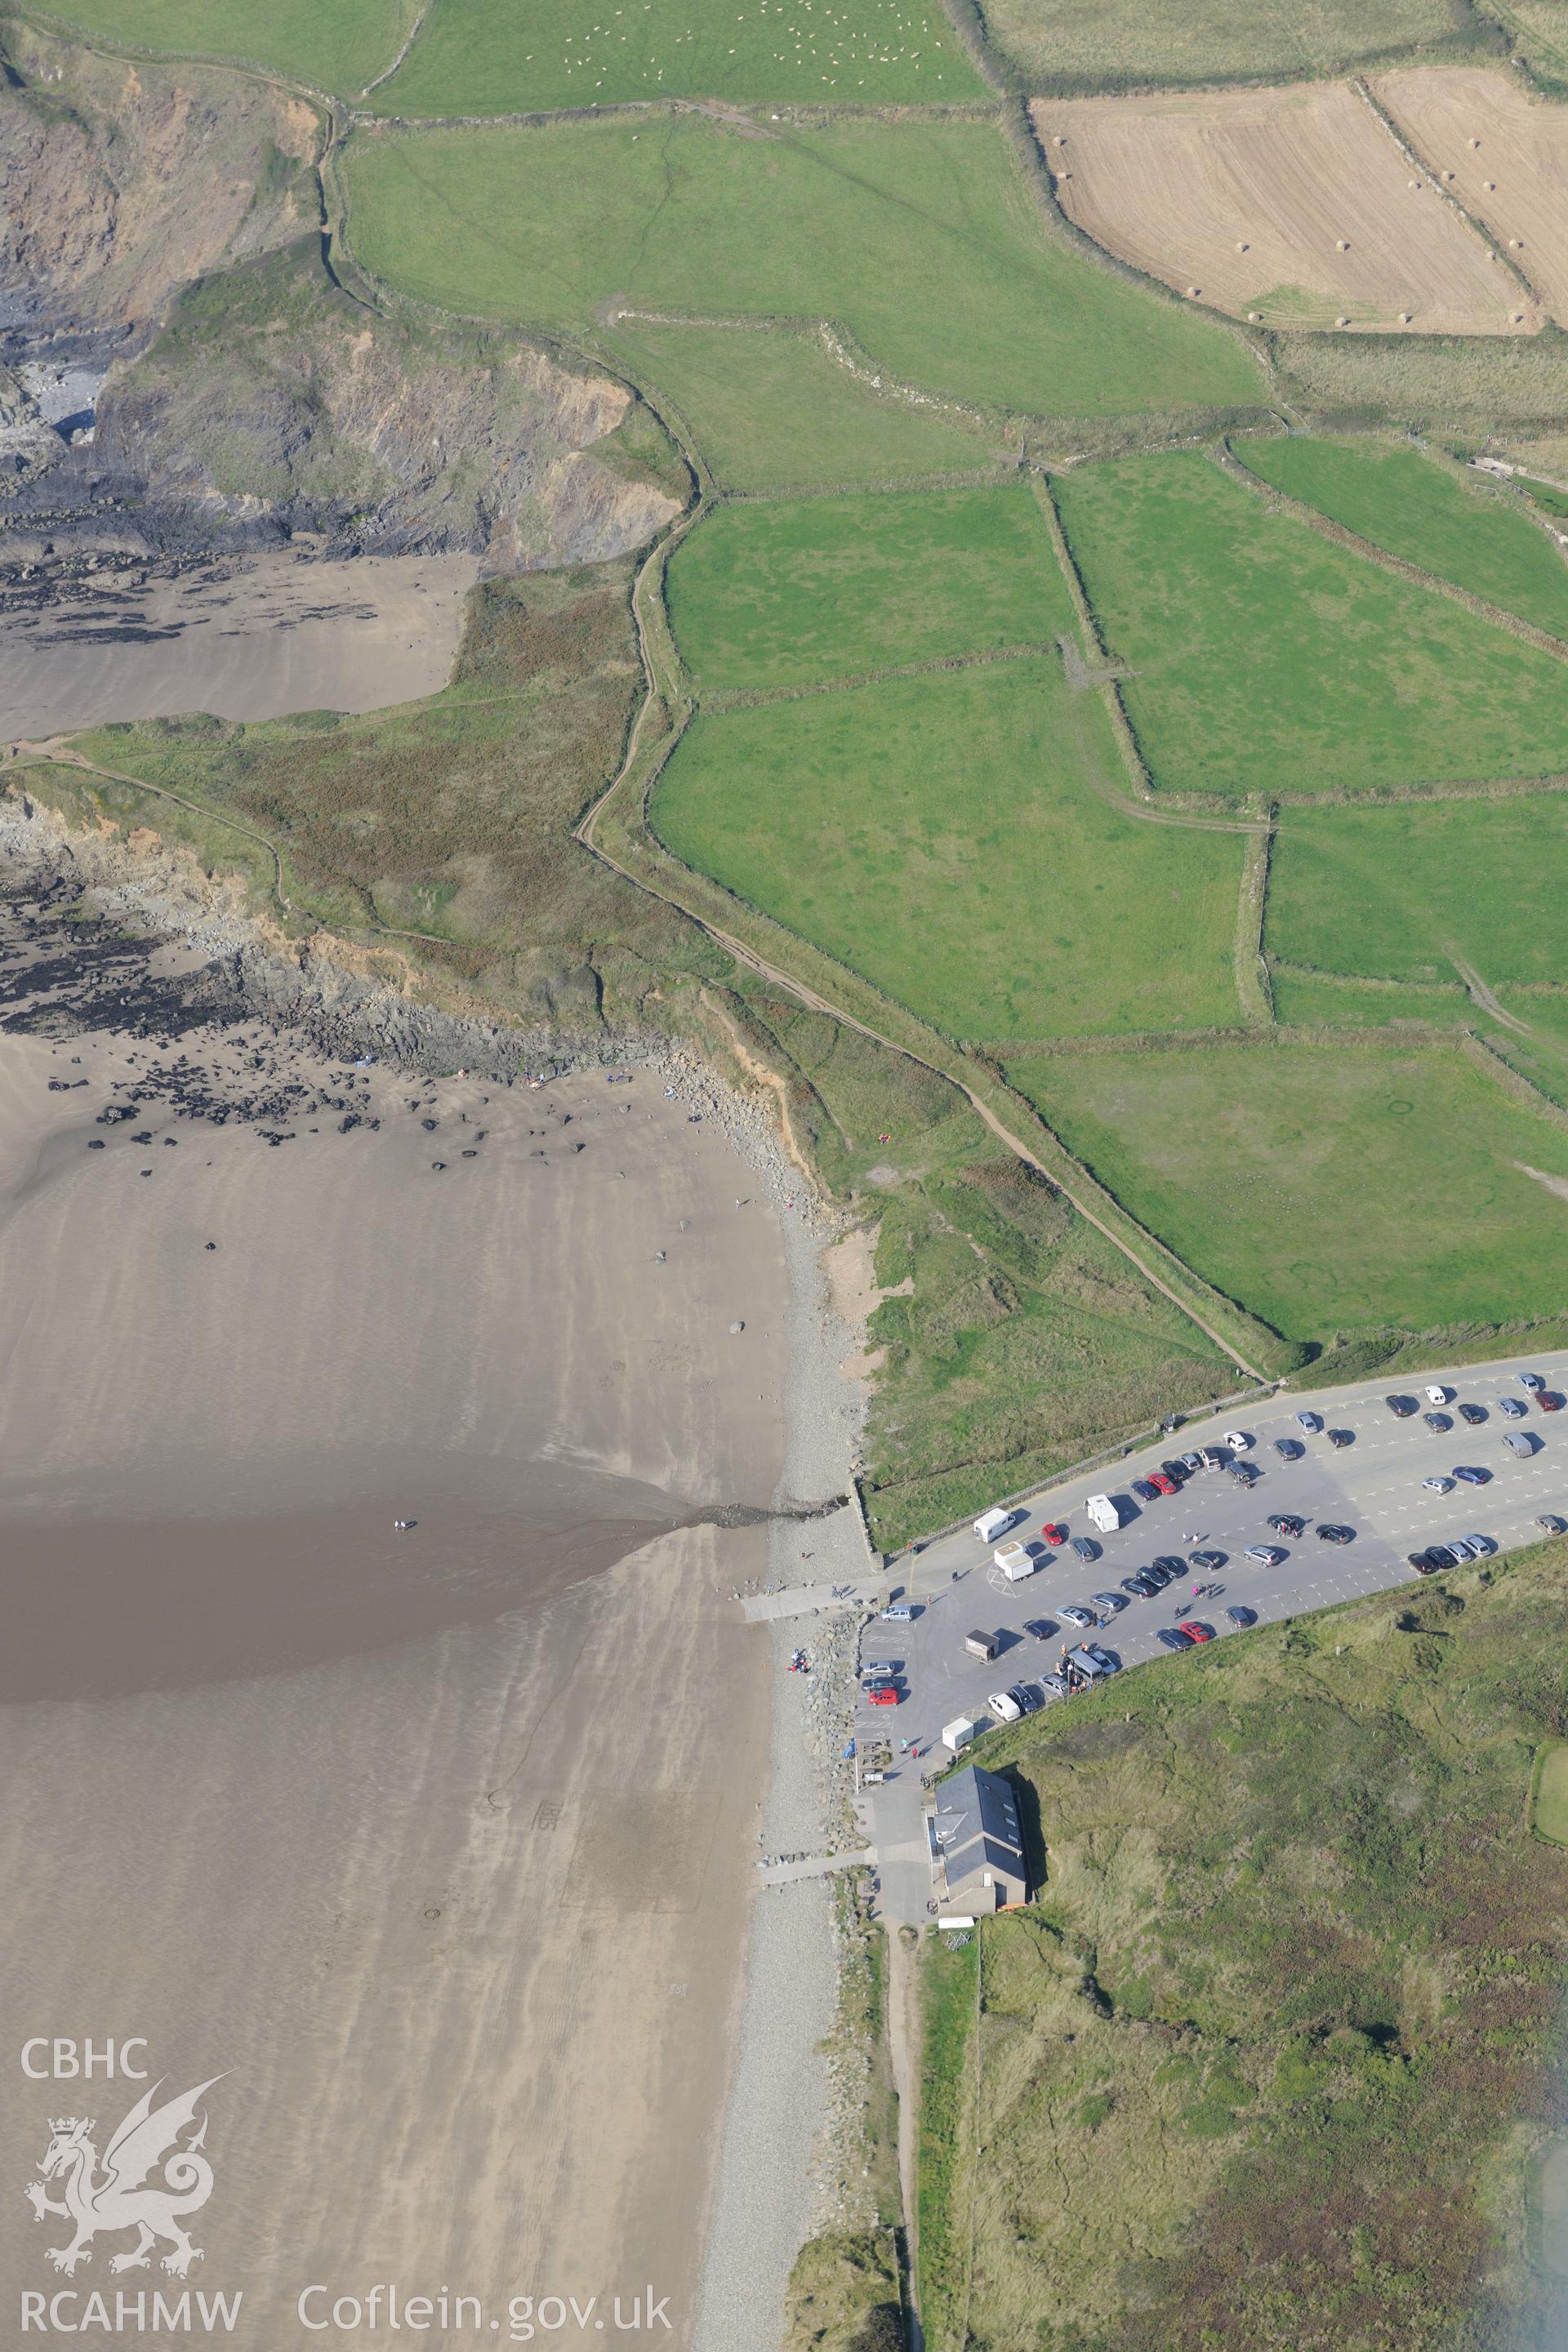 St. Patrick's chapel and Whitesands Bay landing point, north west of St David's, Pembrokeshire. Oblique aerial photograph taken during the Royal Commission's programme of archaeological aerial reconnaissance by Toby Driver on 30th September 2015.